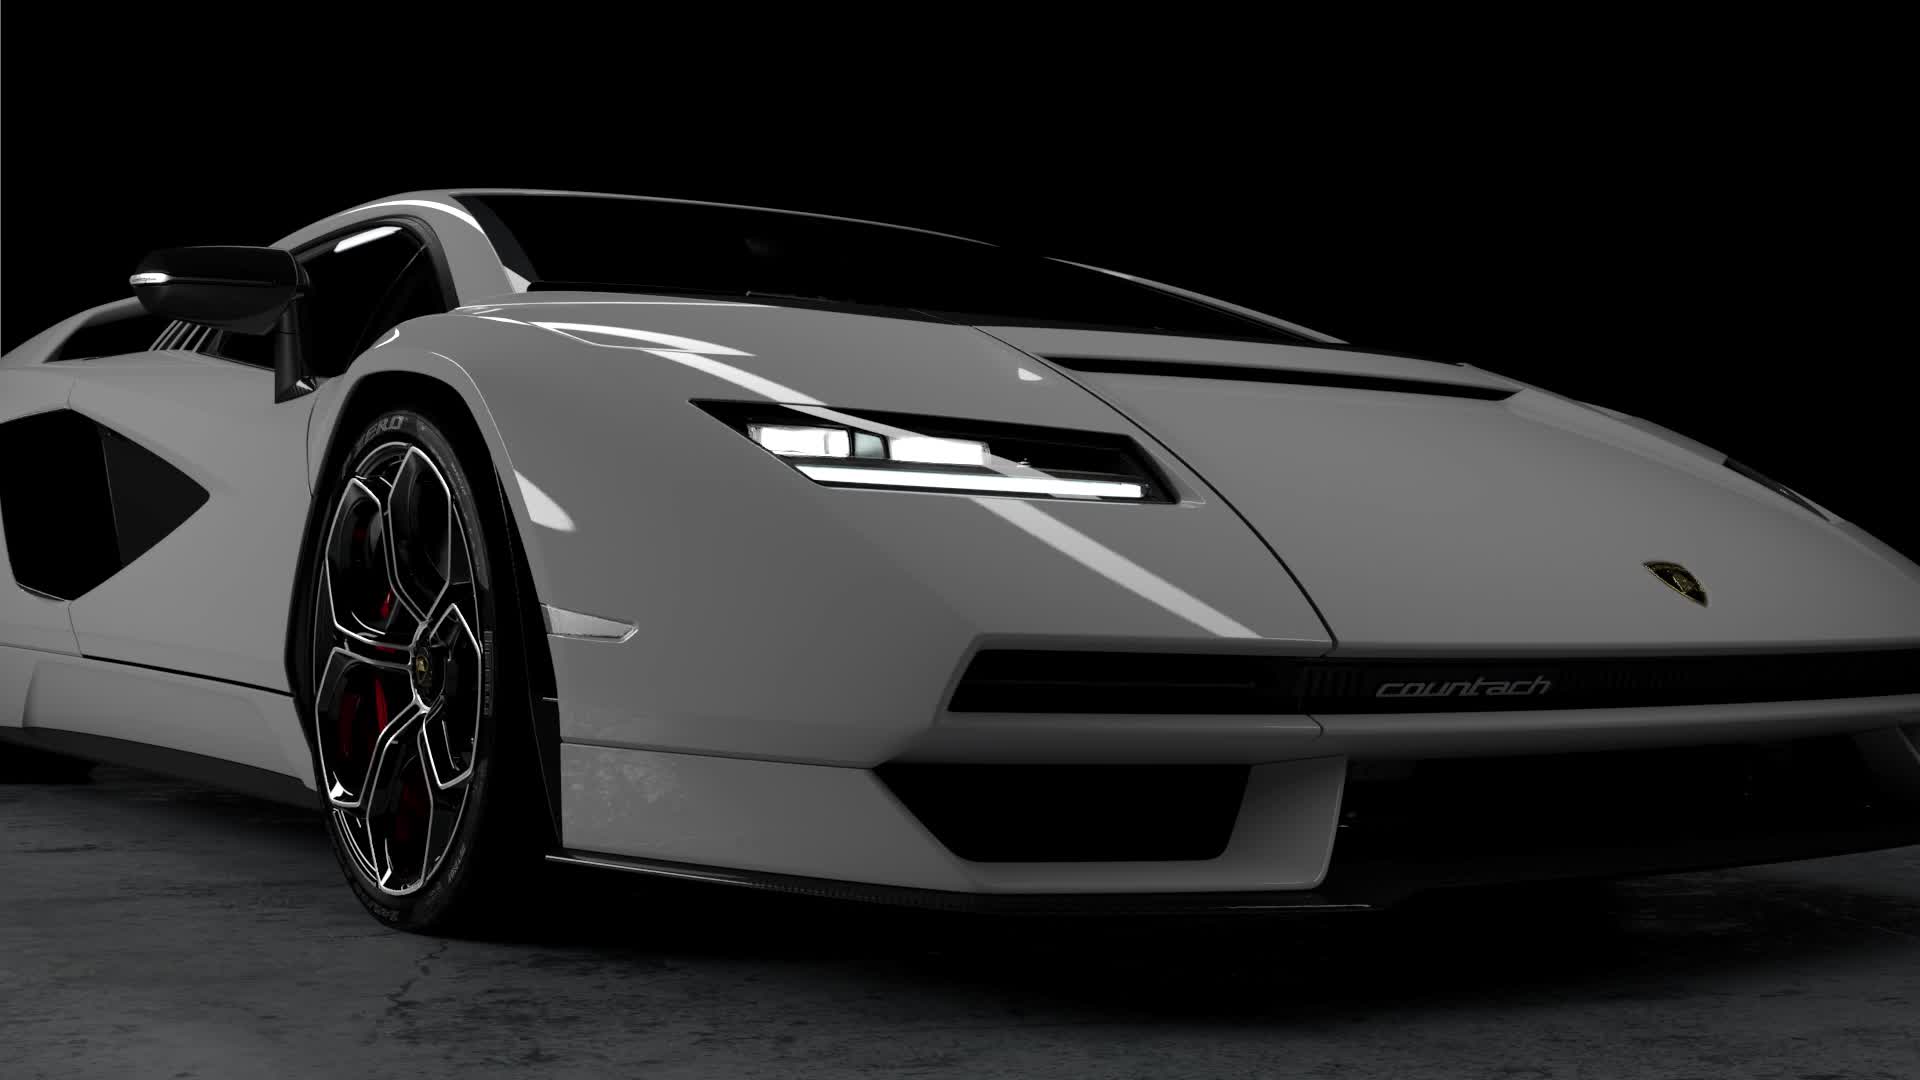 Countach Is Back, Baby!